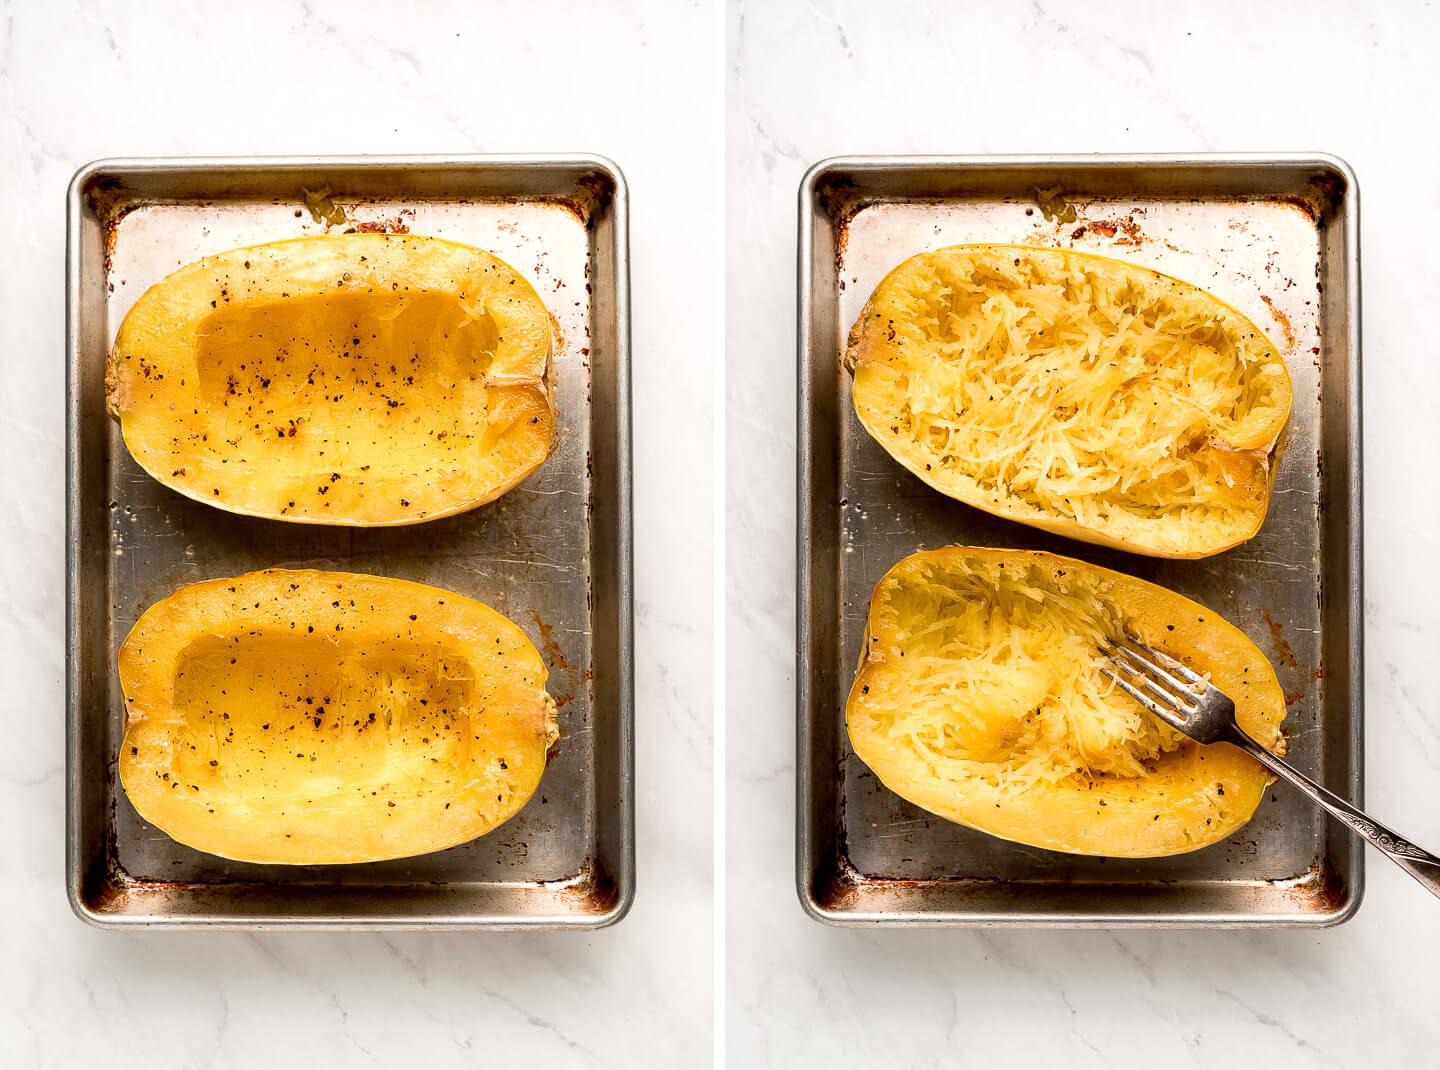 Cooked spaghetti squash on a baking sheet.